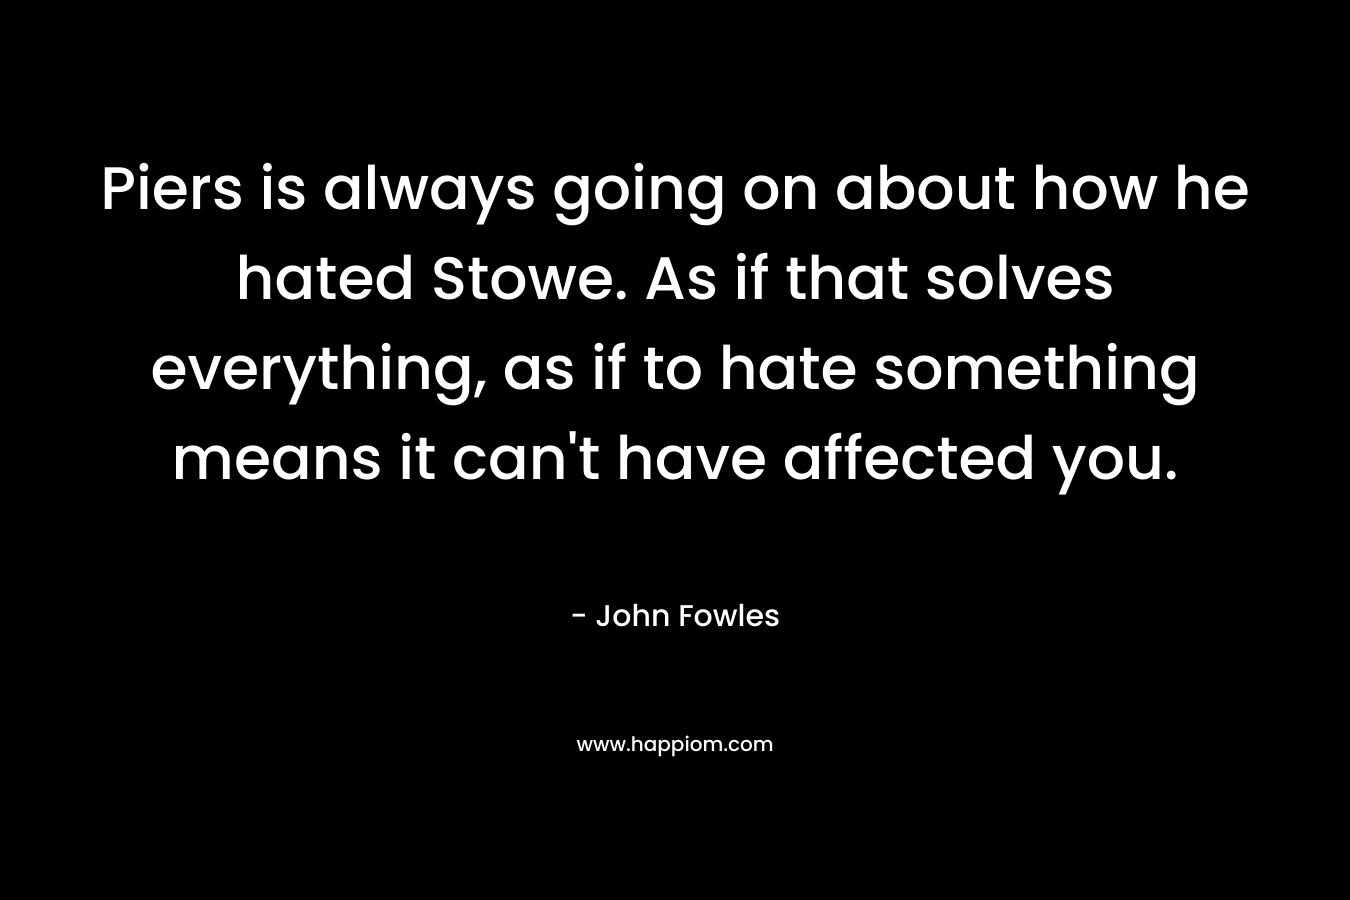 Piers is always going on about how he hated Stowe. As if that solves everything, as if to hate something means it can’t have affected you.  – John Fowles